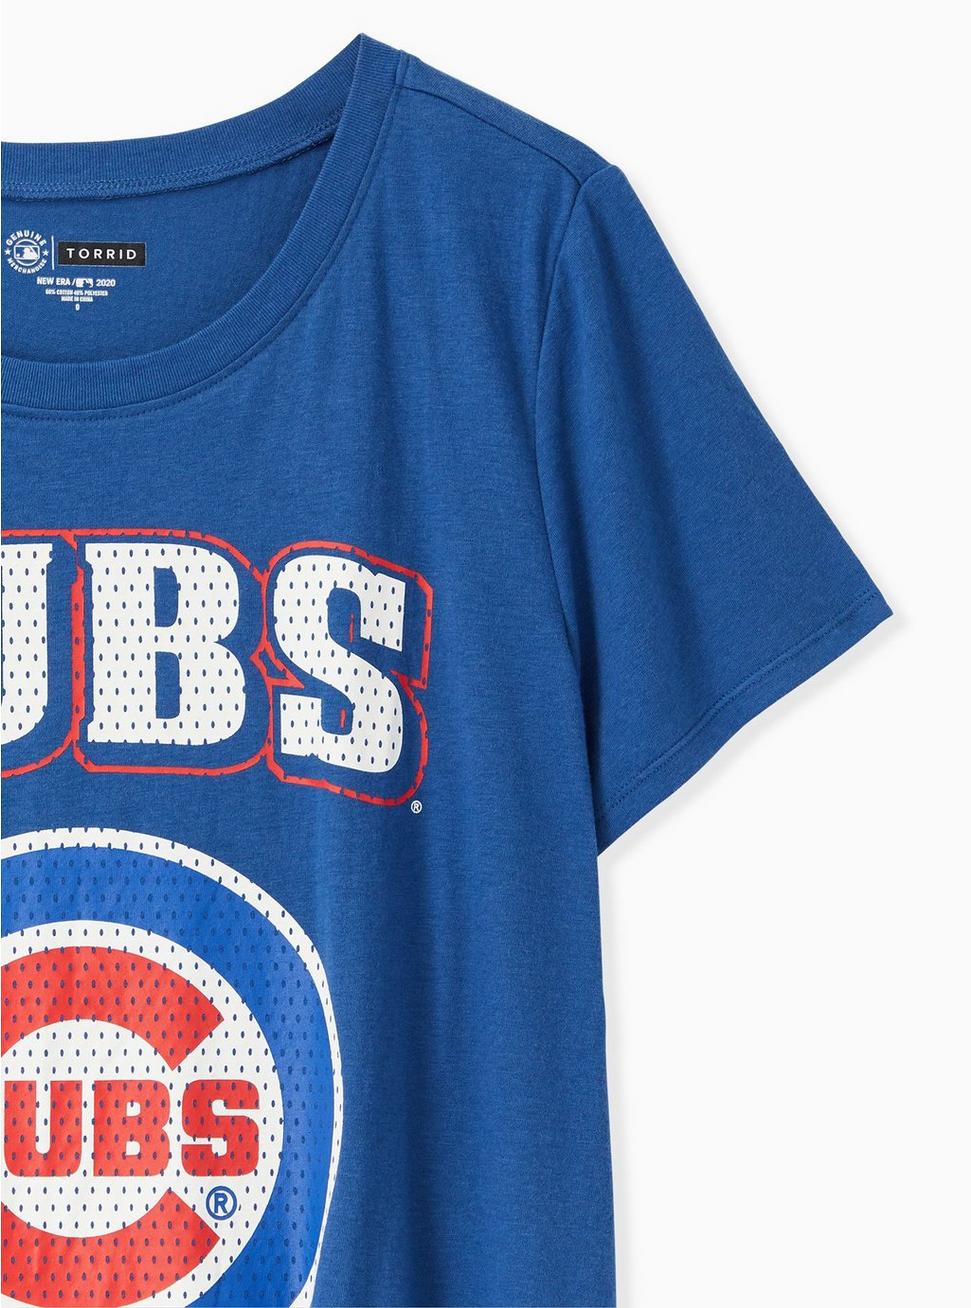 Plus Size - MLB Chicago Cubs Tie Front Tee - Blue - Torrid